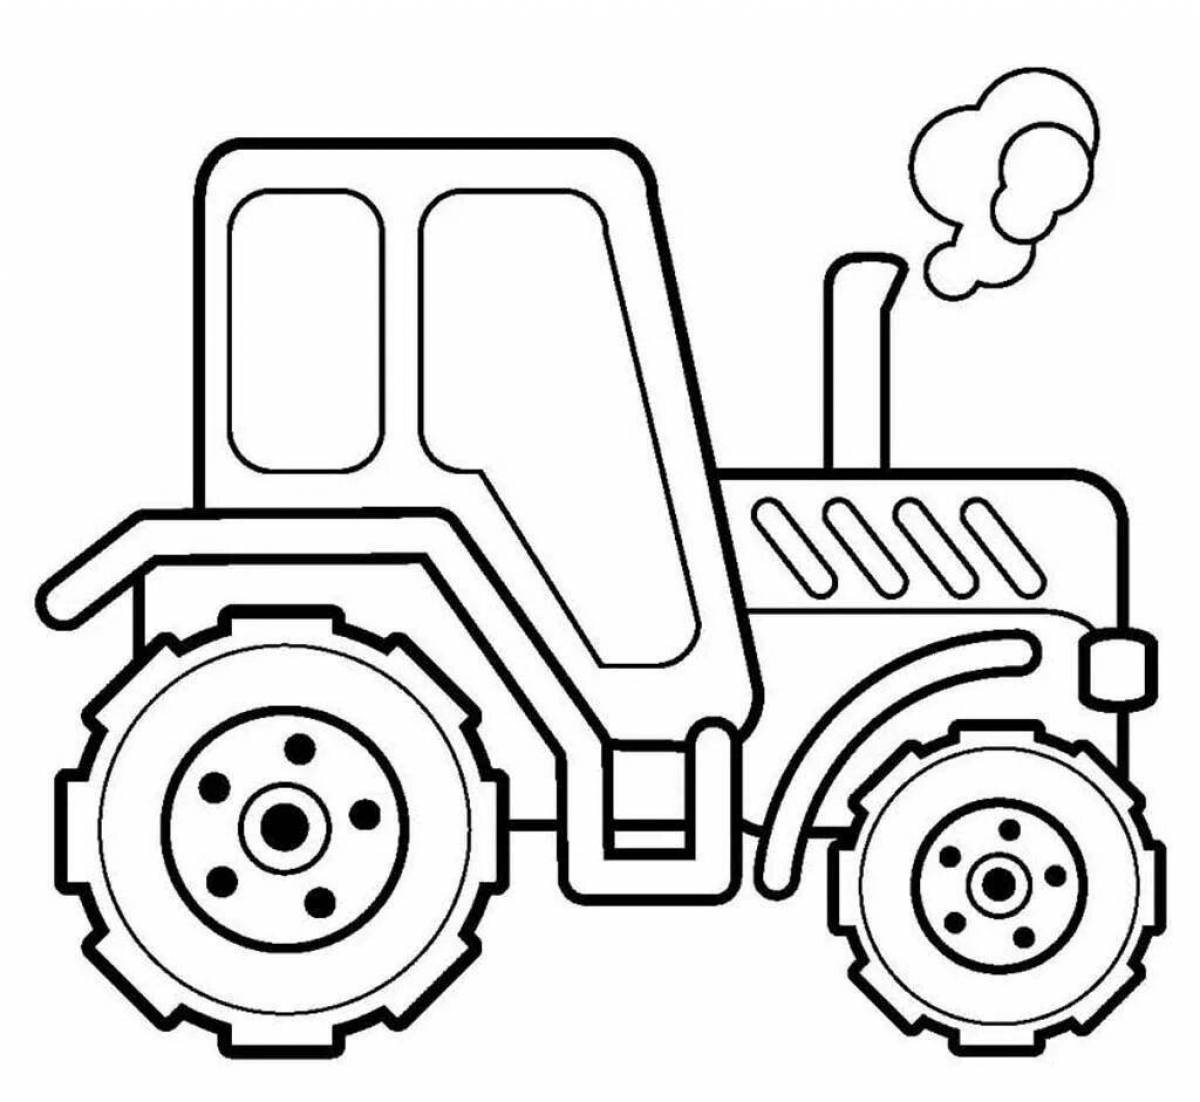 Gorgeous tractor coloring book for kids